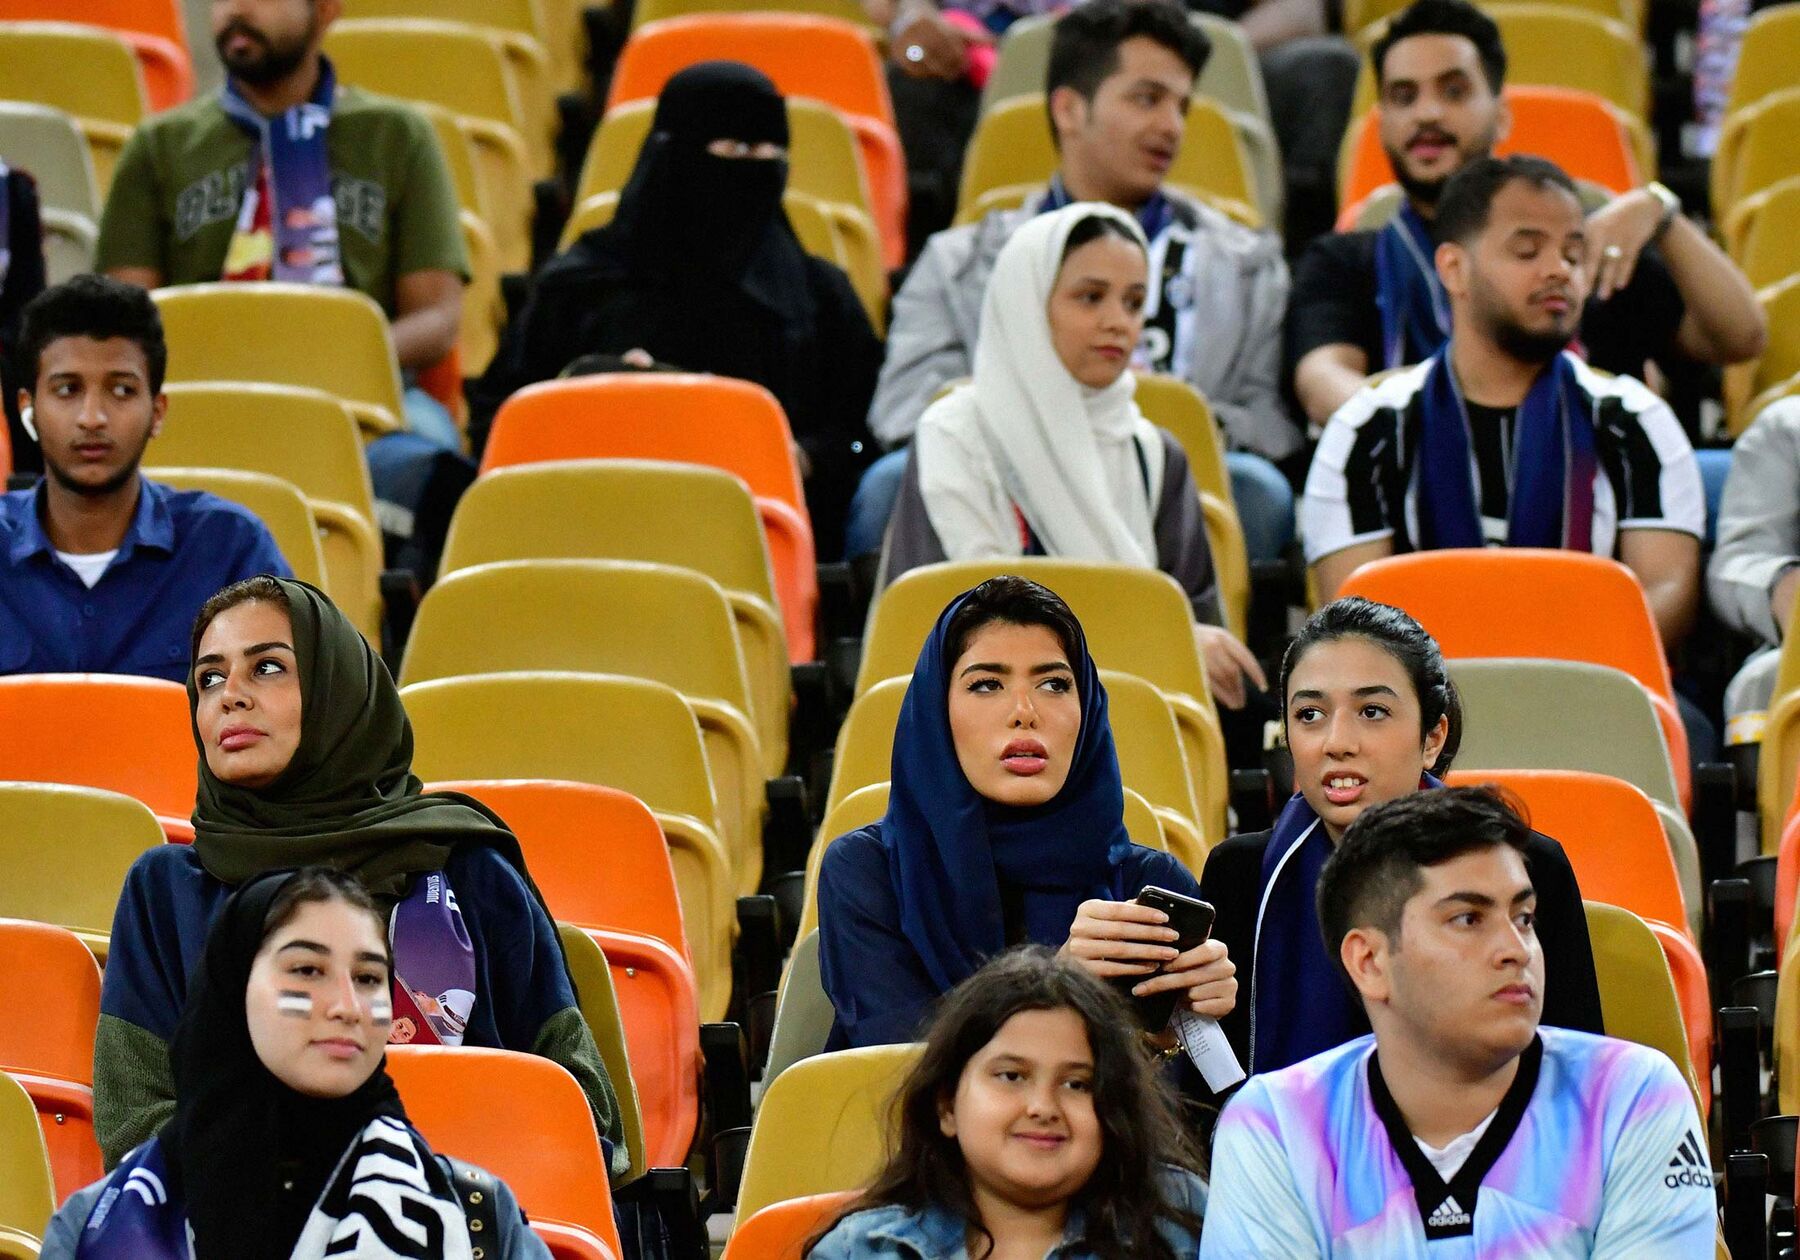 Fans in the stands ahead of the Supercoppa Italiana final between Juventus and AC Milan at the King Abdullah Sports City Stadium in Jeddah on Jan. 16.